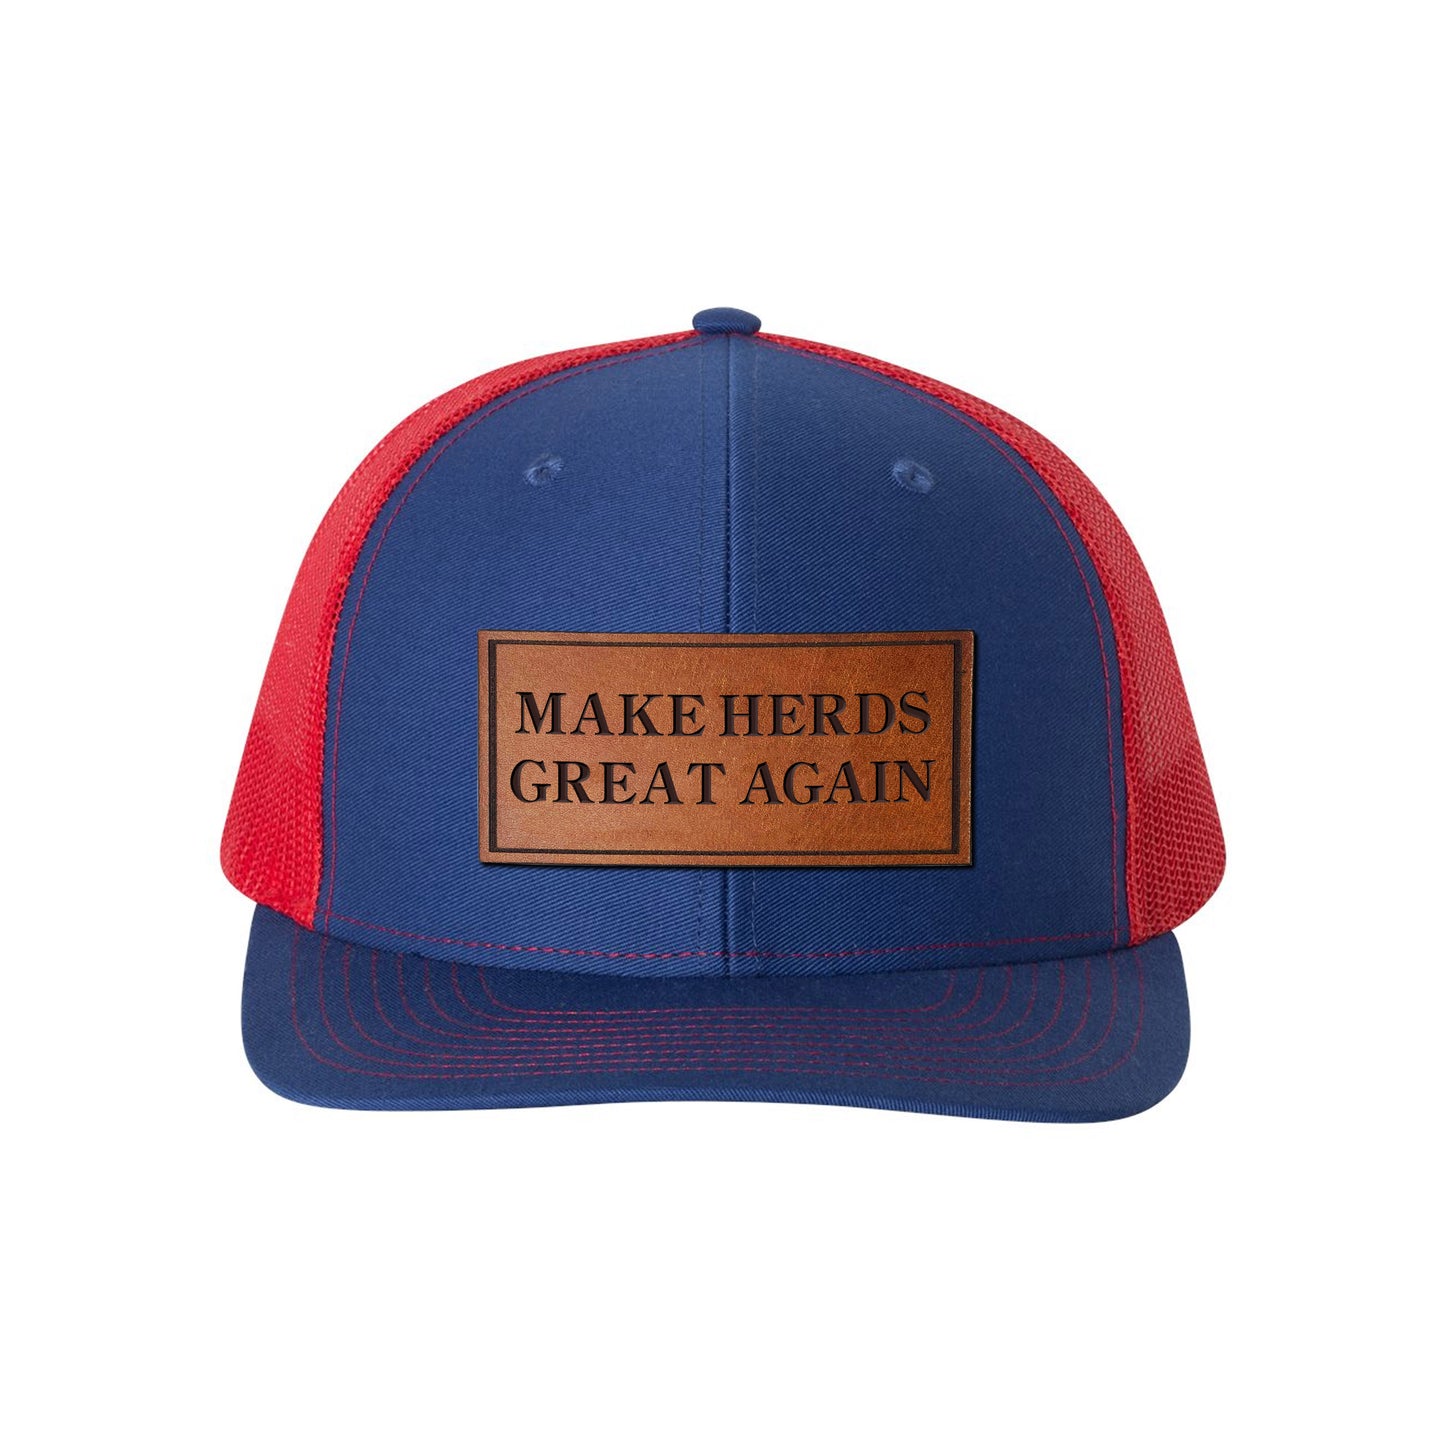 CR Make Herds Great Again Leather Snapback